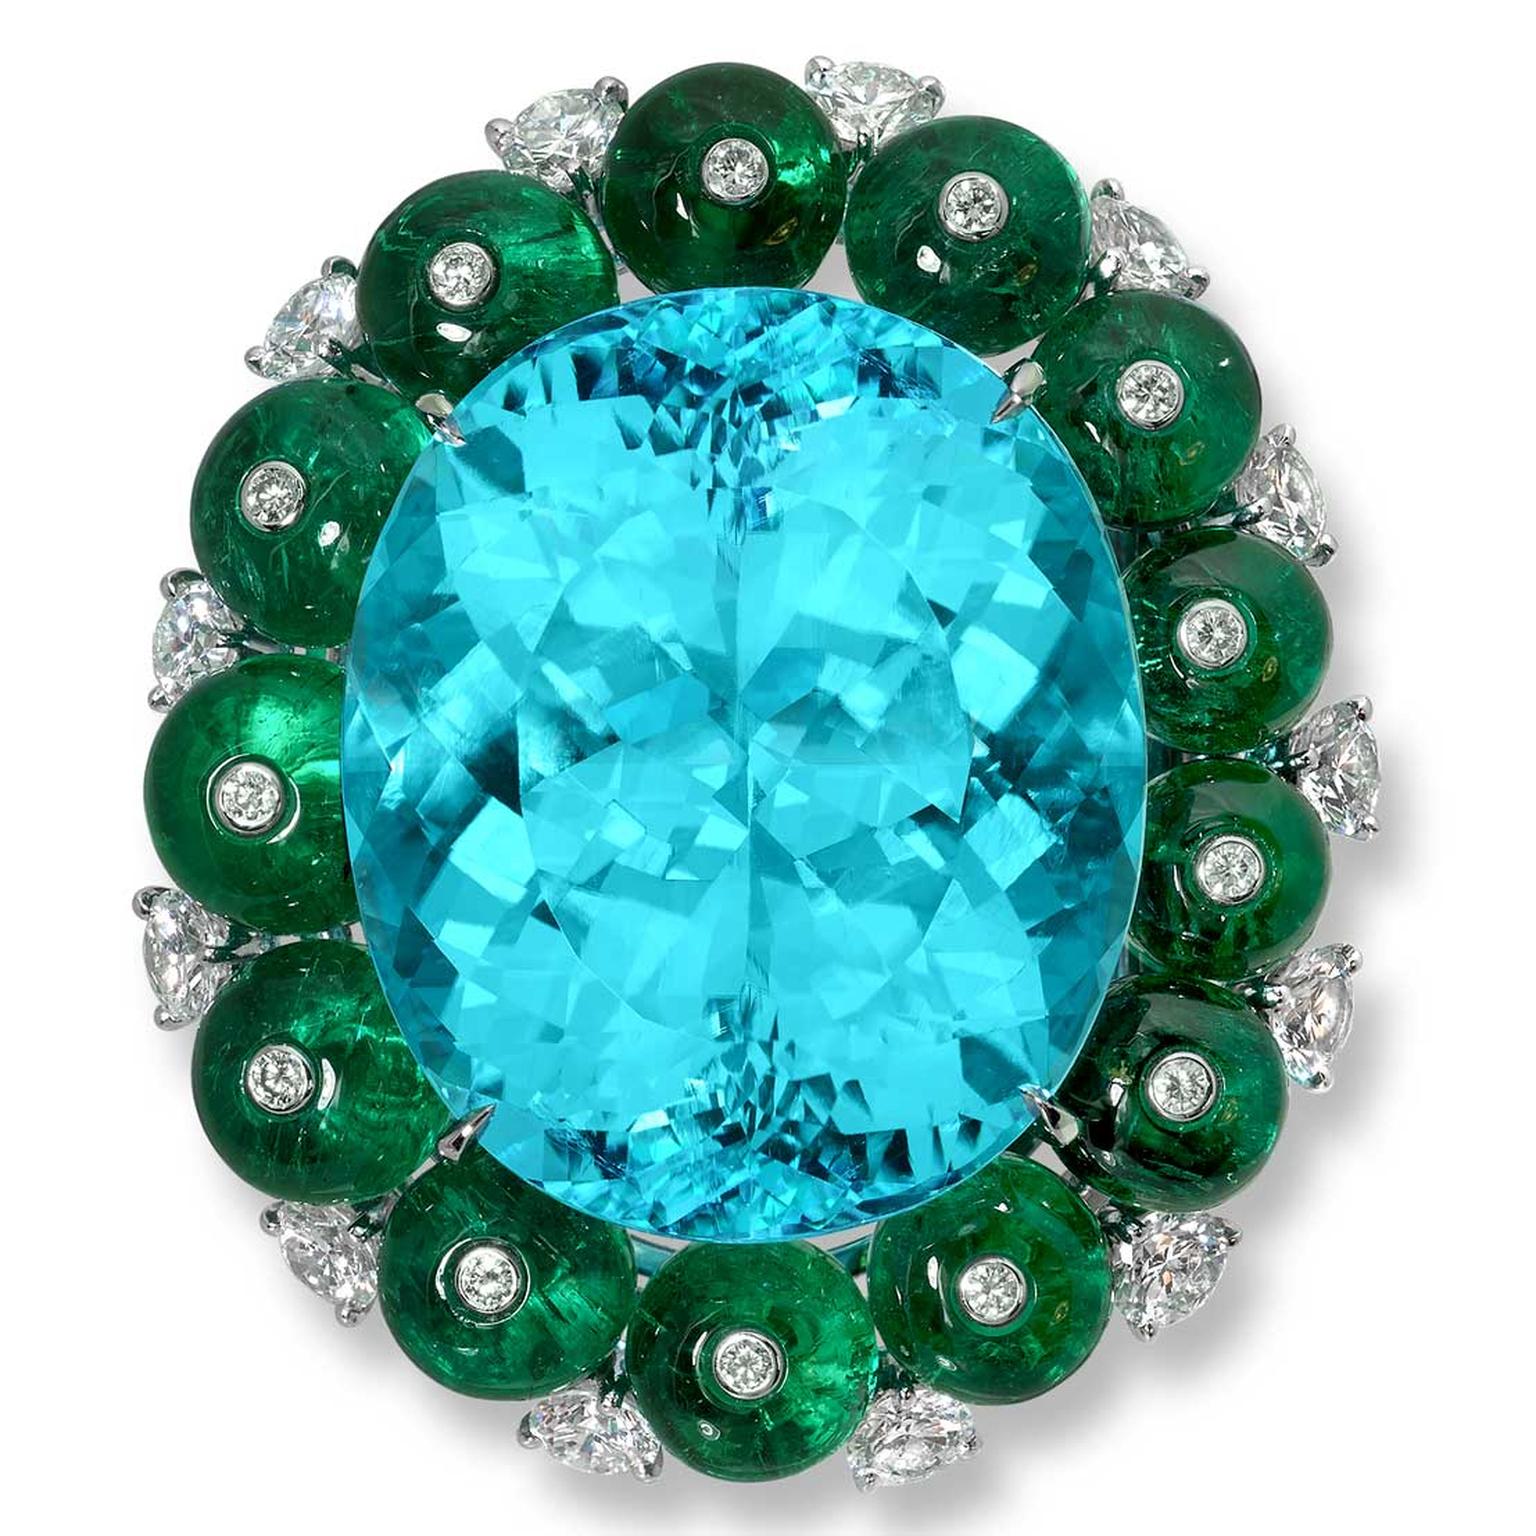 Moussaieff scarf clip with a 57.21ct Paraiba tourmaline 26cts of emeralds and 2.88cts of diamonds set in platinum.